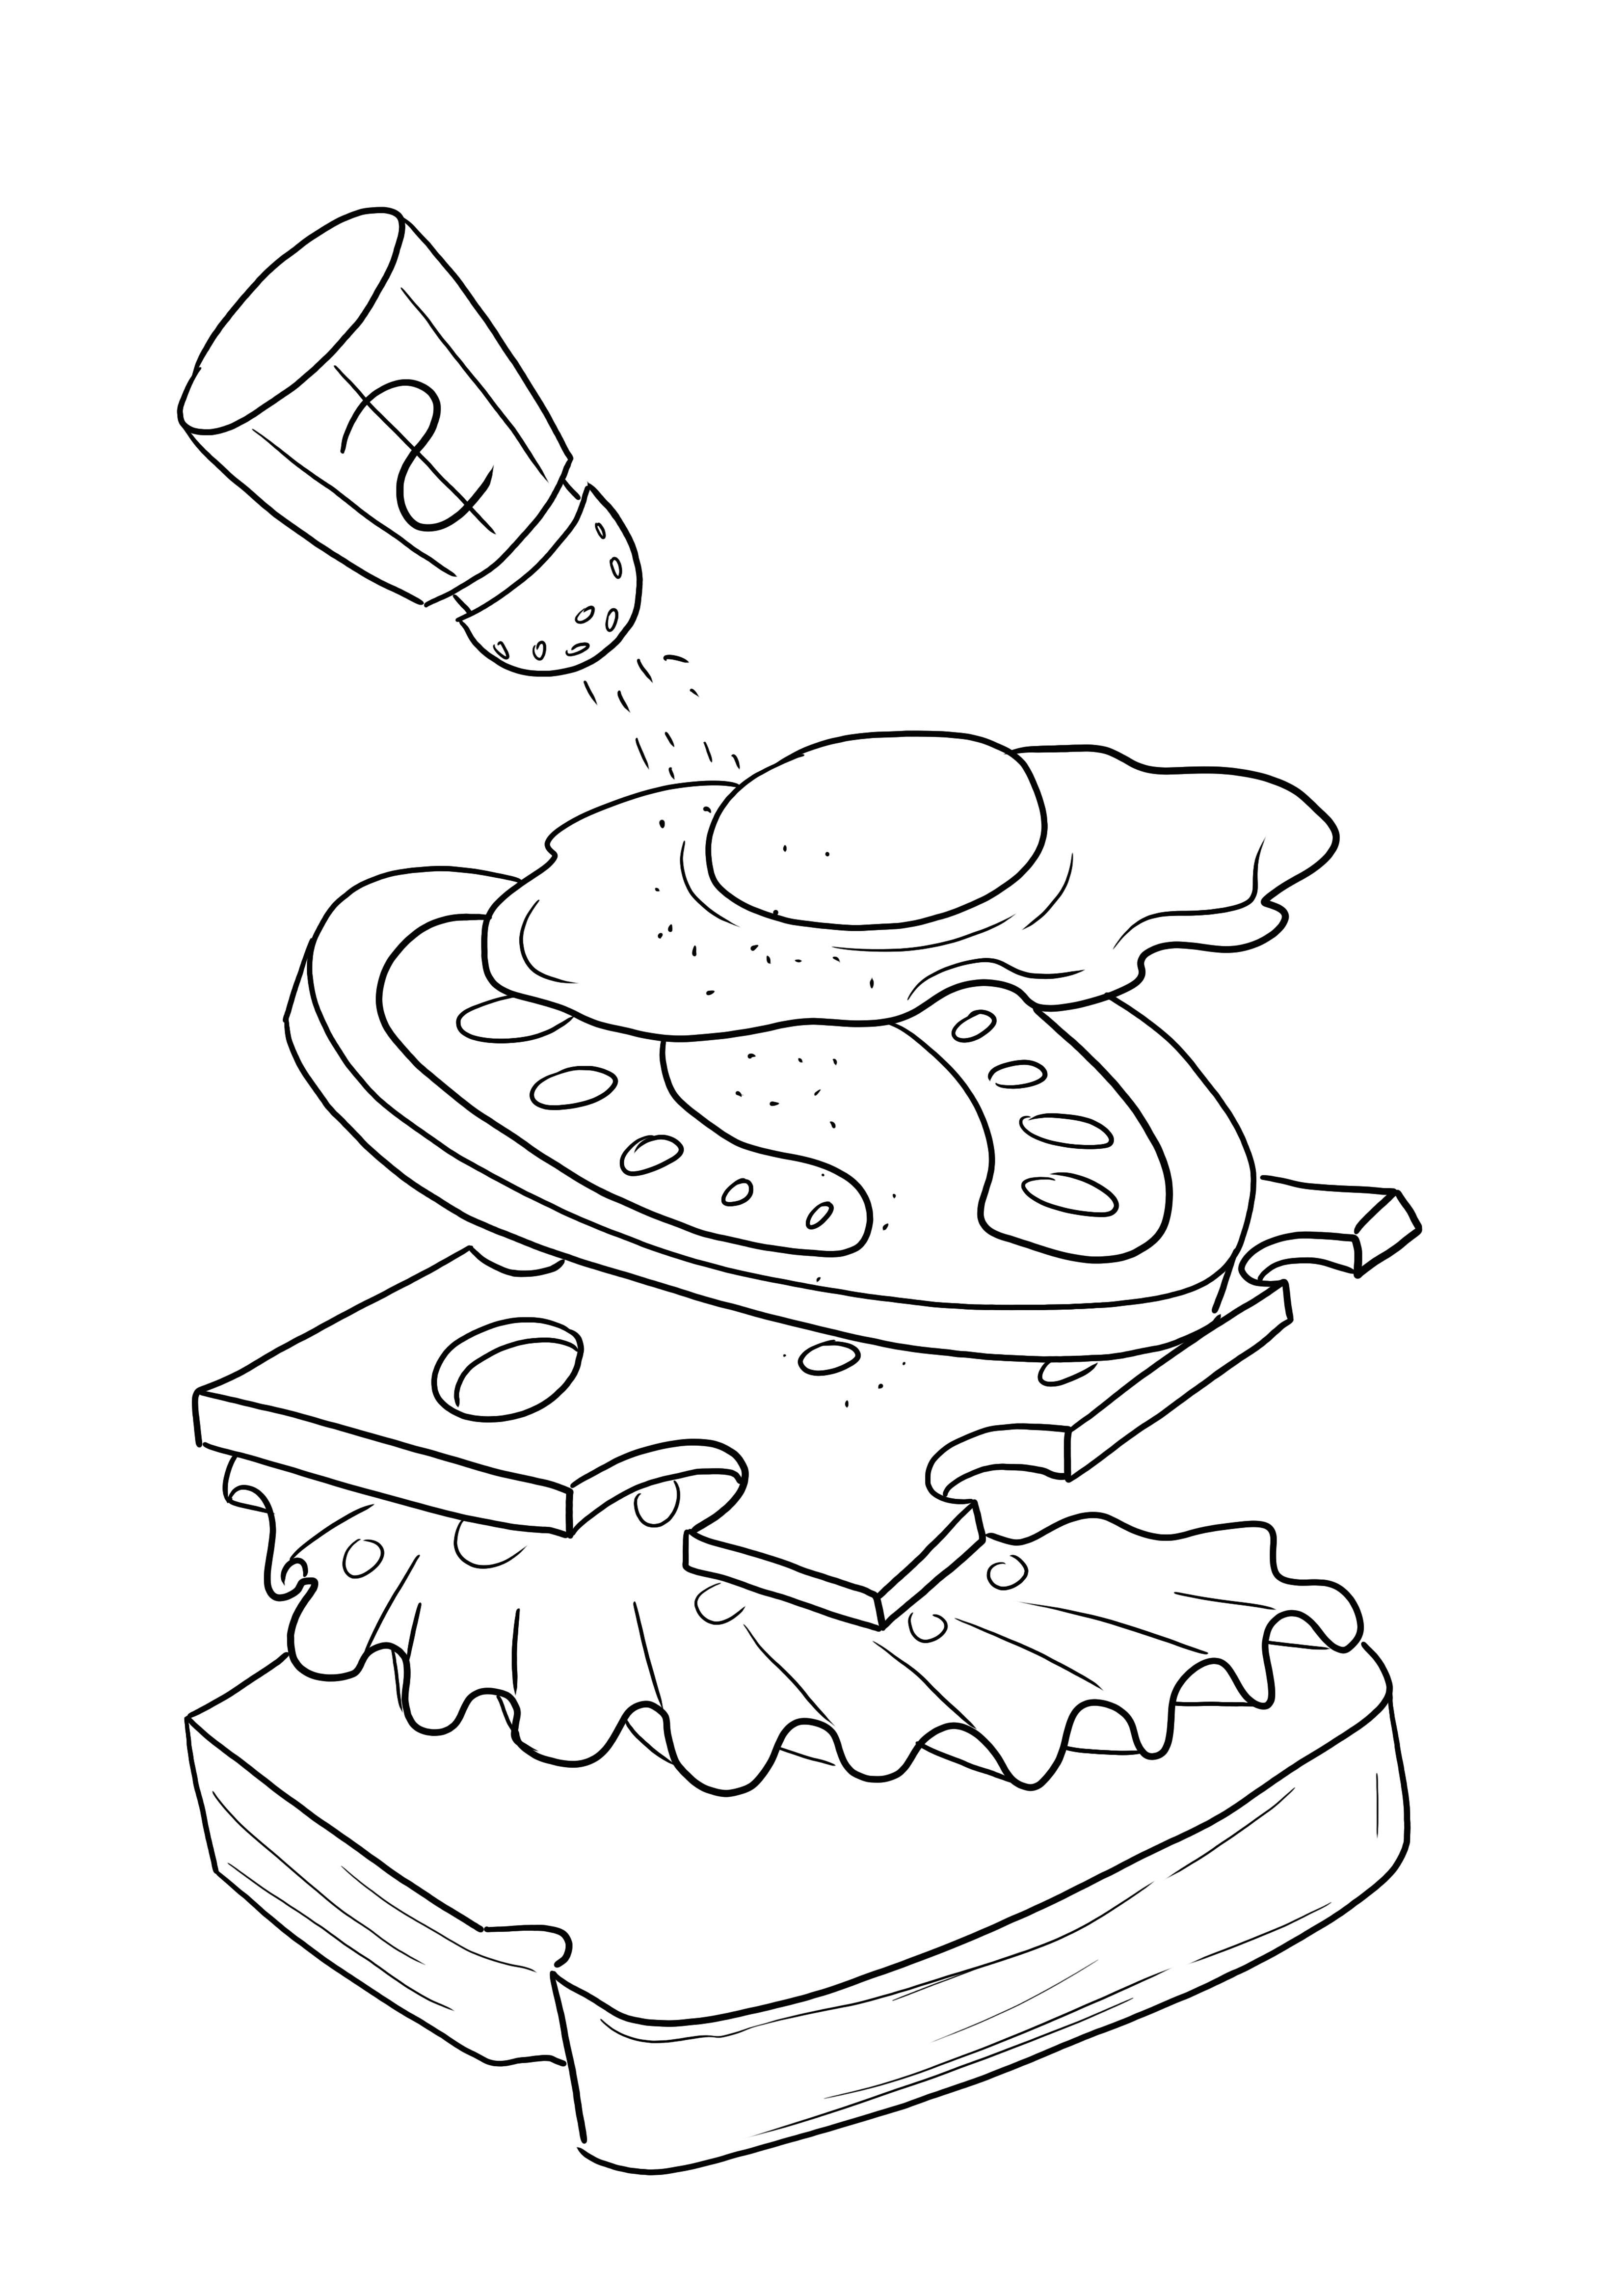 Free to color and print egg and cheese sandwich sheet for children